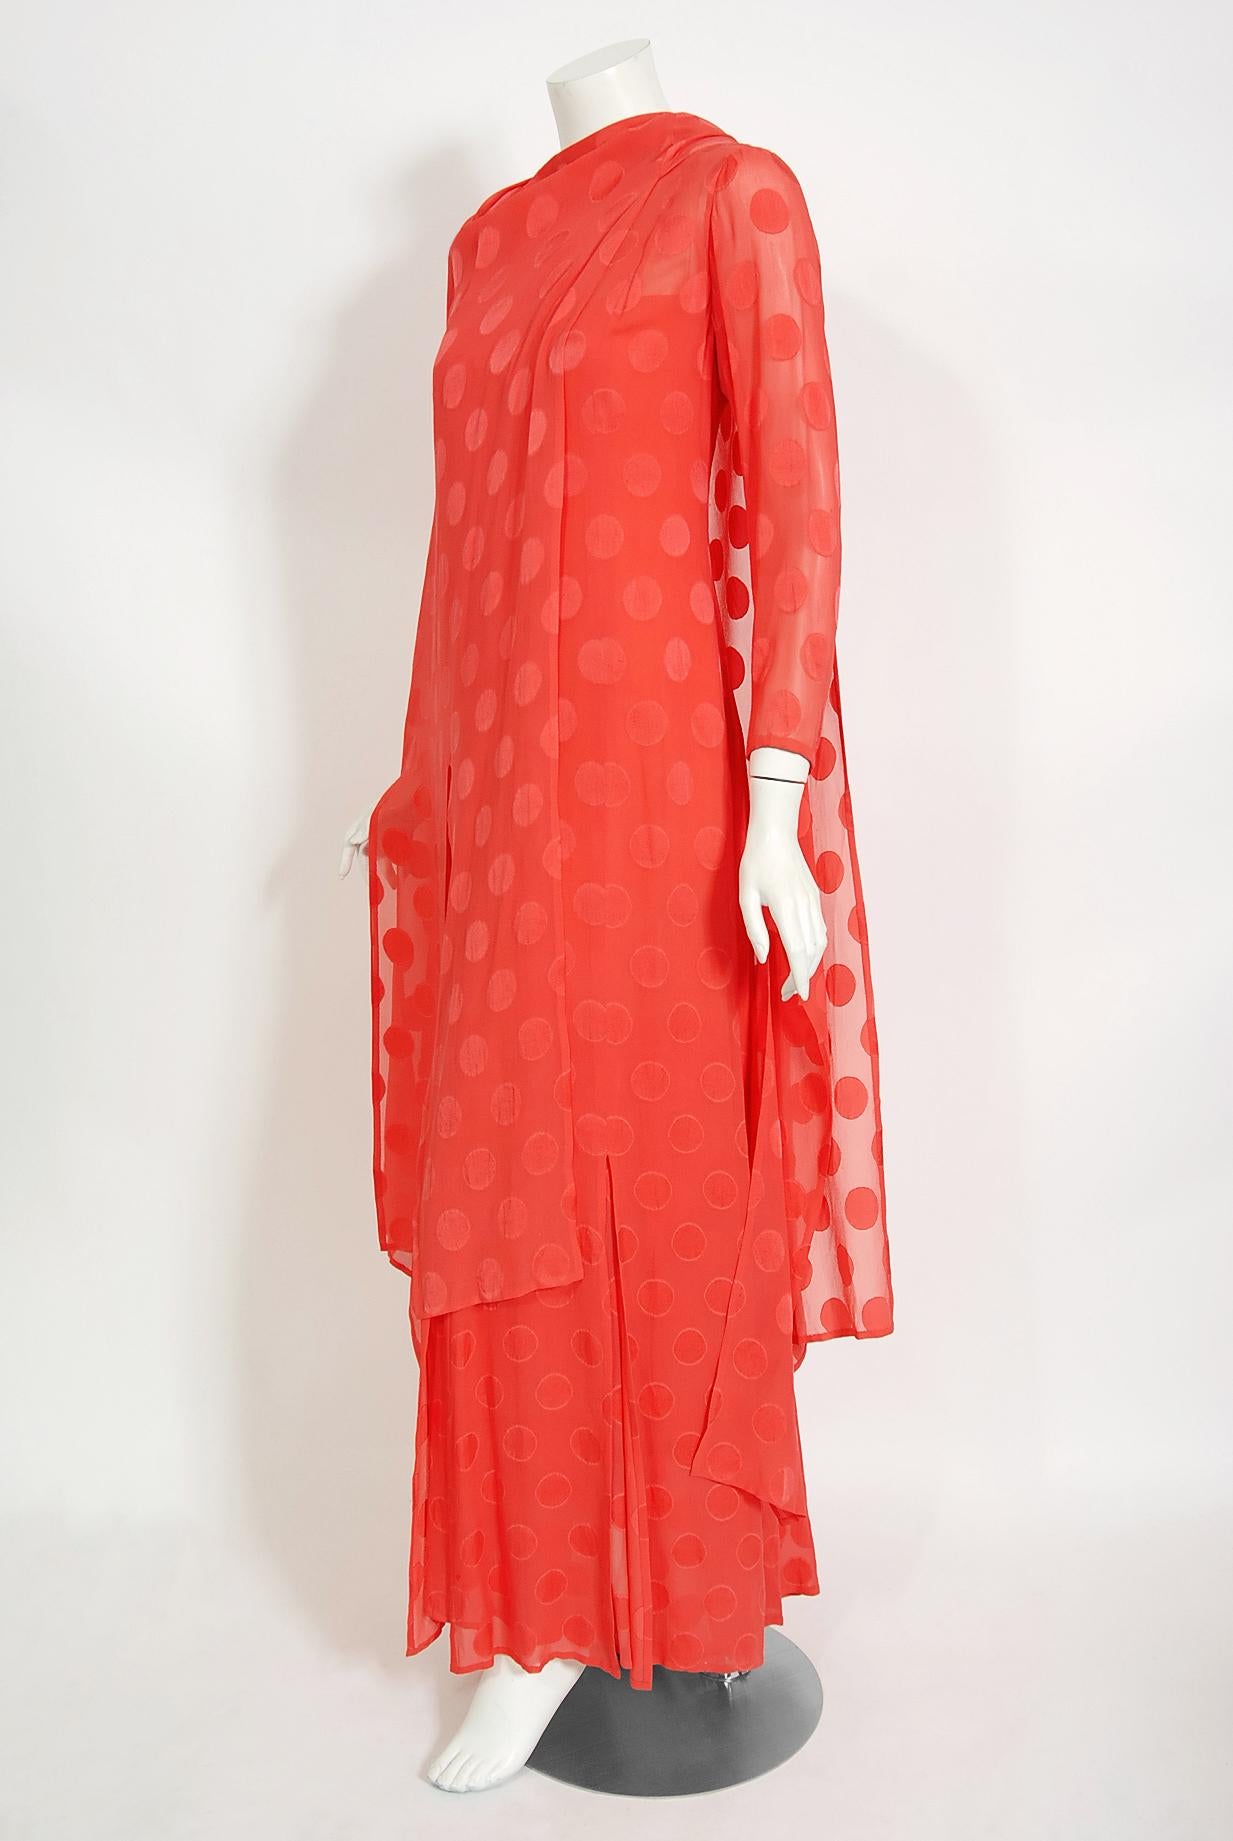 Women's Vintage 1973 Givenchy Haute Couture Orange Dotted Silk Carwash-Hem Caftan Gown For Sale